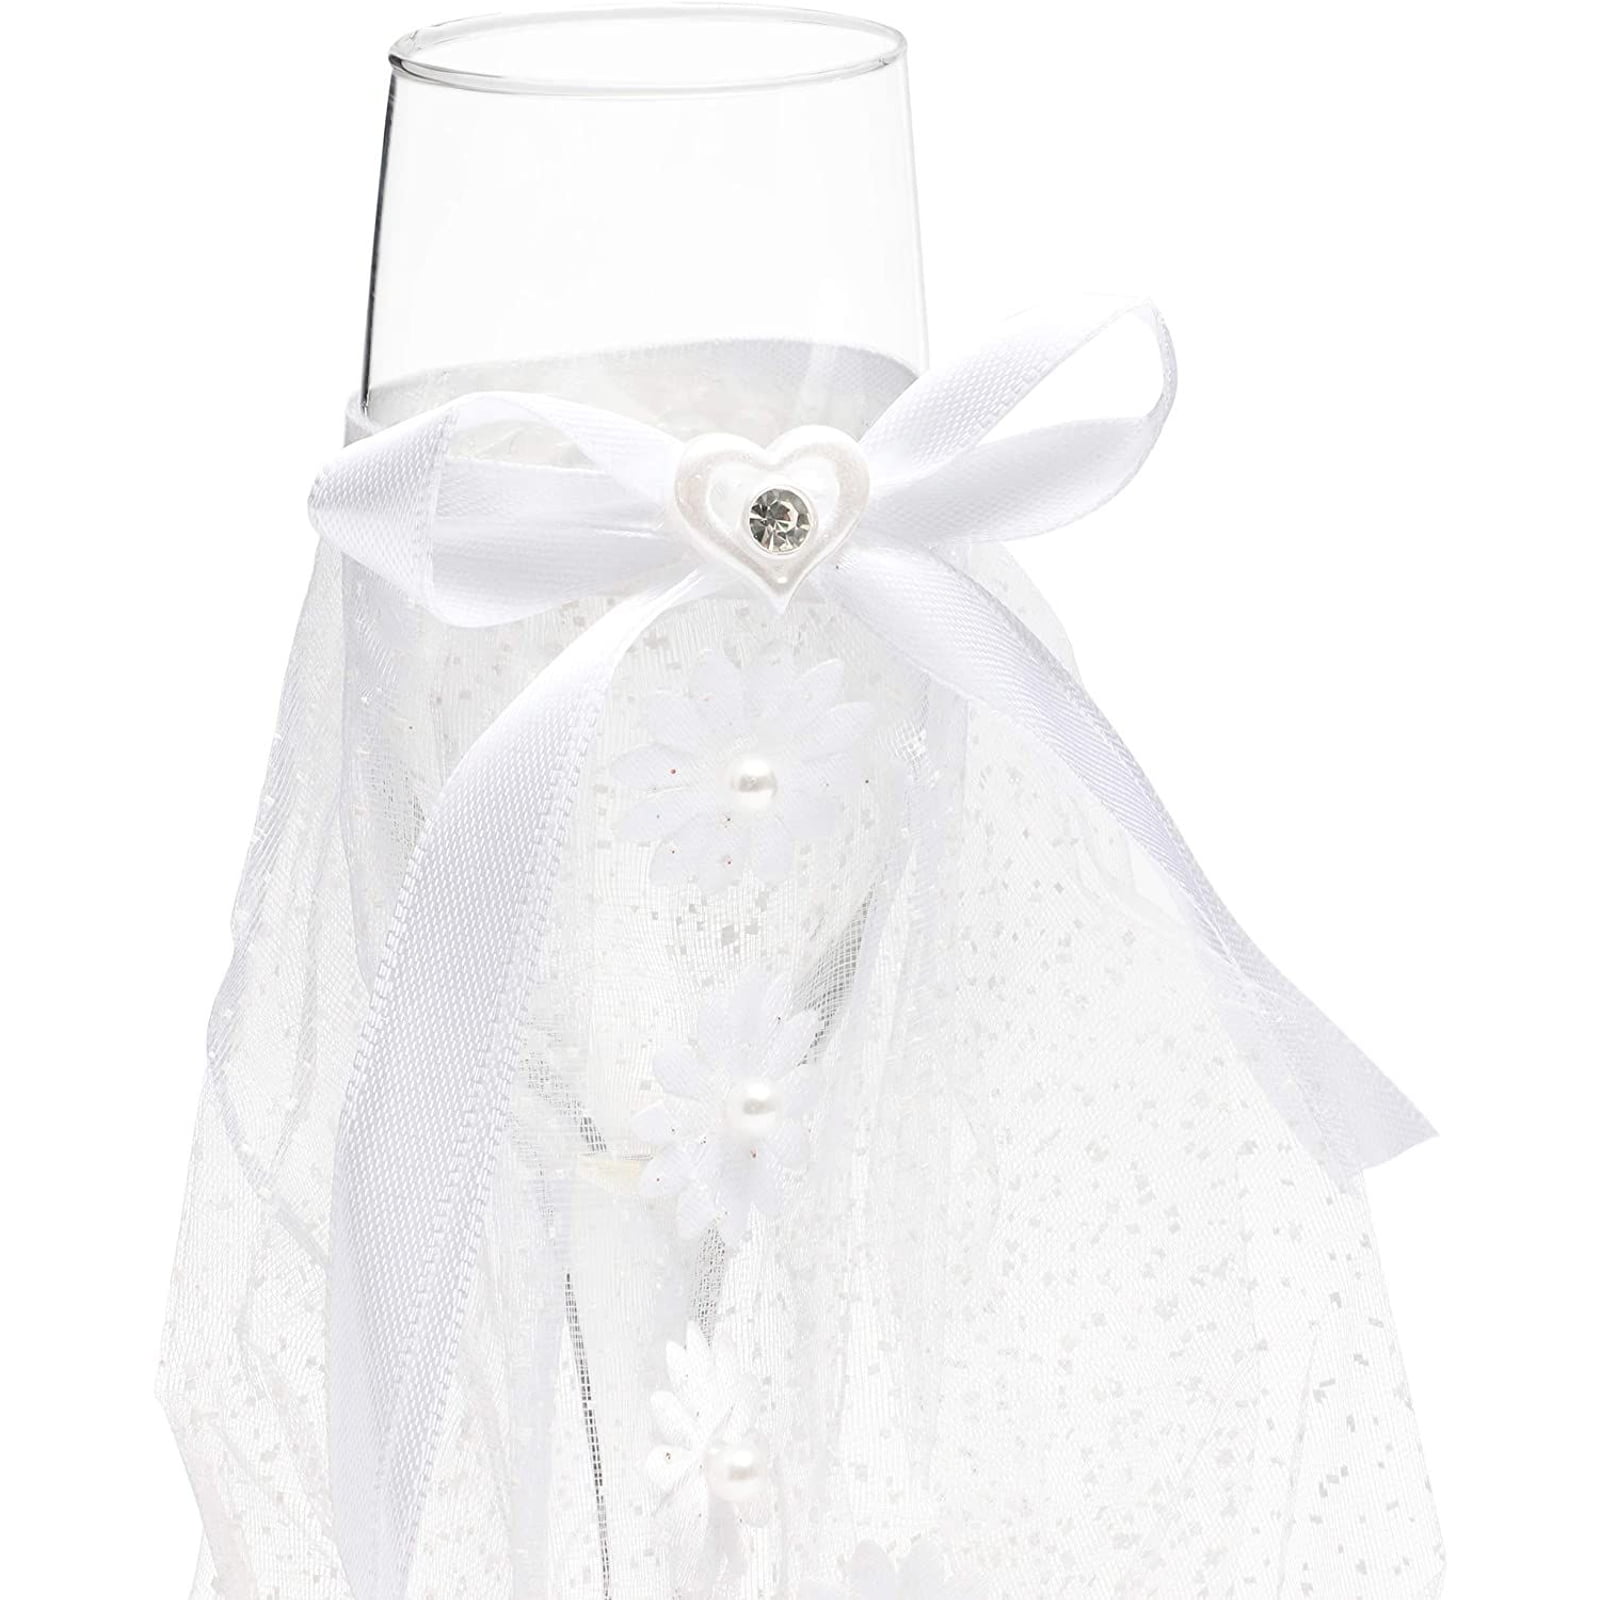 White wedding lace decorative 12 pack gift bags Mr&Mrs Bride and Groom 